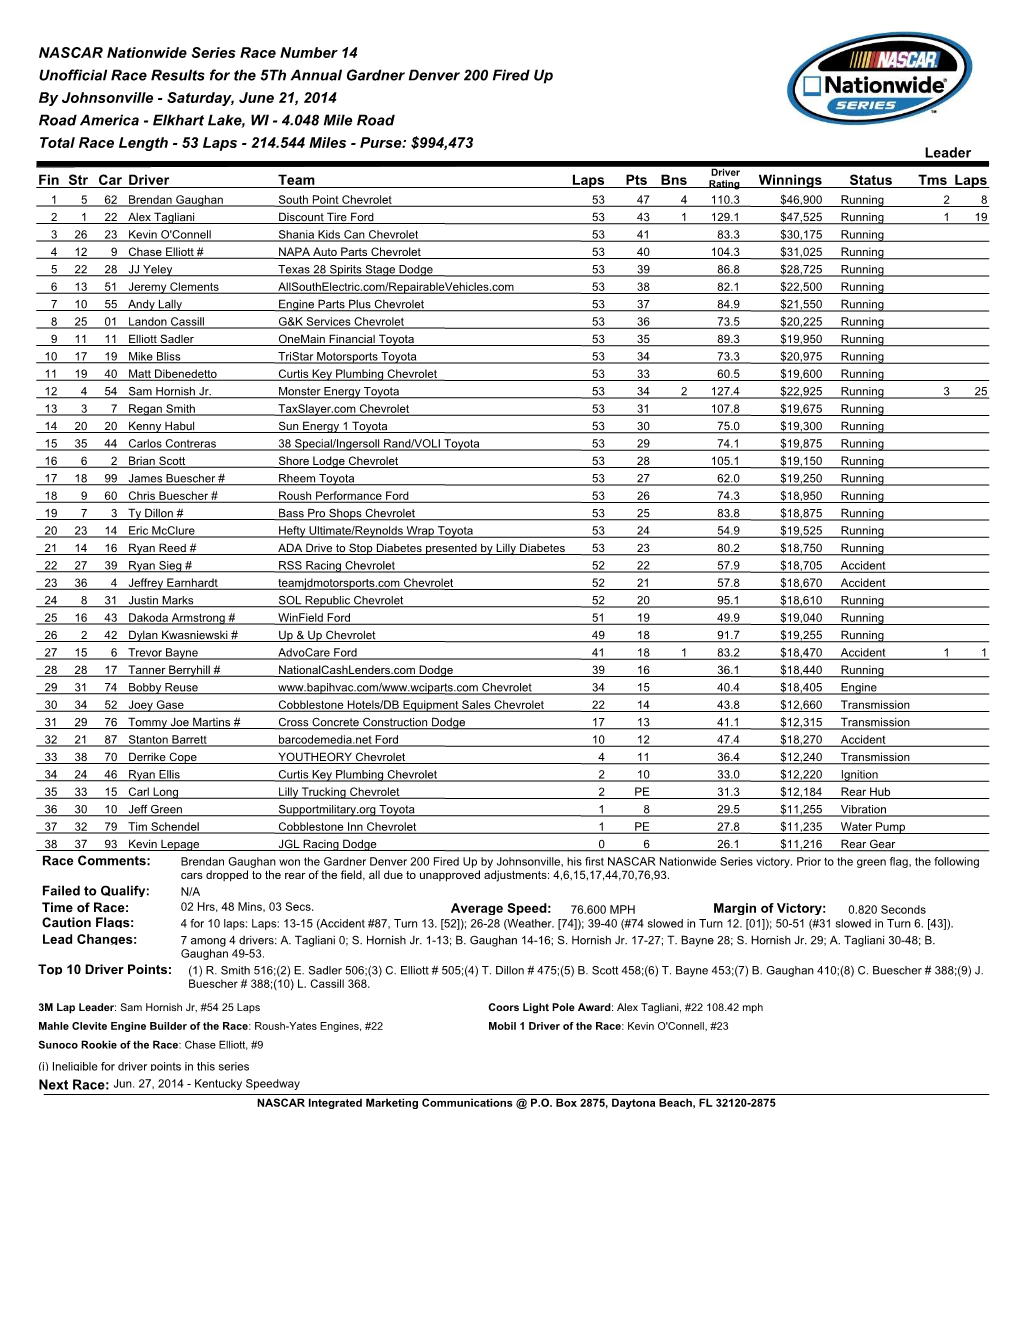 NASCAR Nationwide Series Race Number 14 Unofficial Race Results for the 5Th Annual Gardner Denver 200 Fired up by Johnsonville